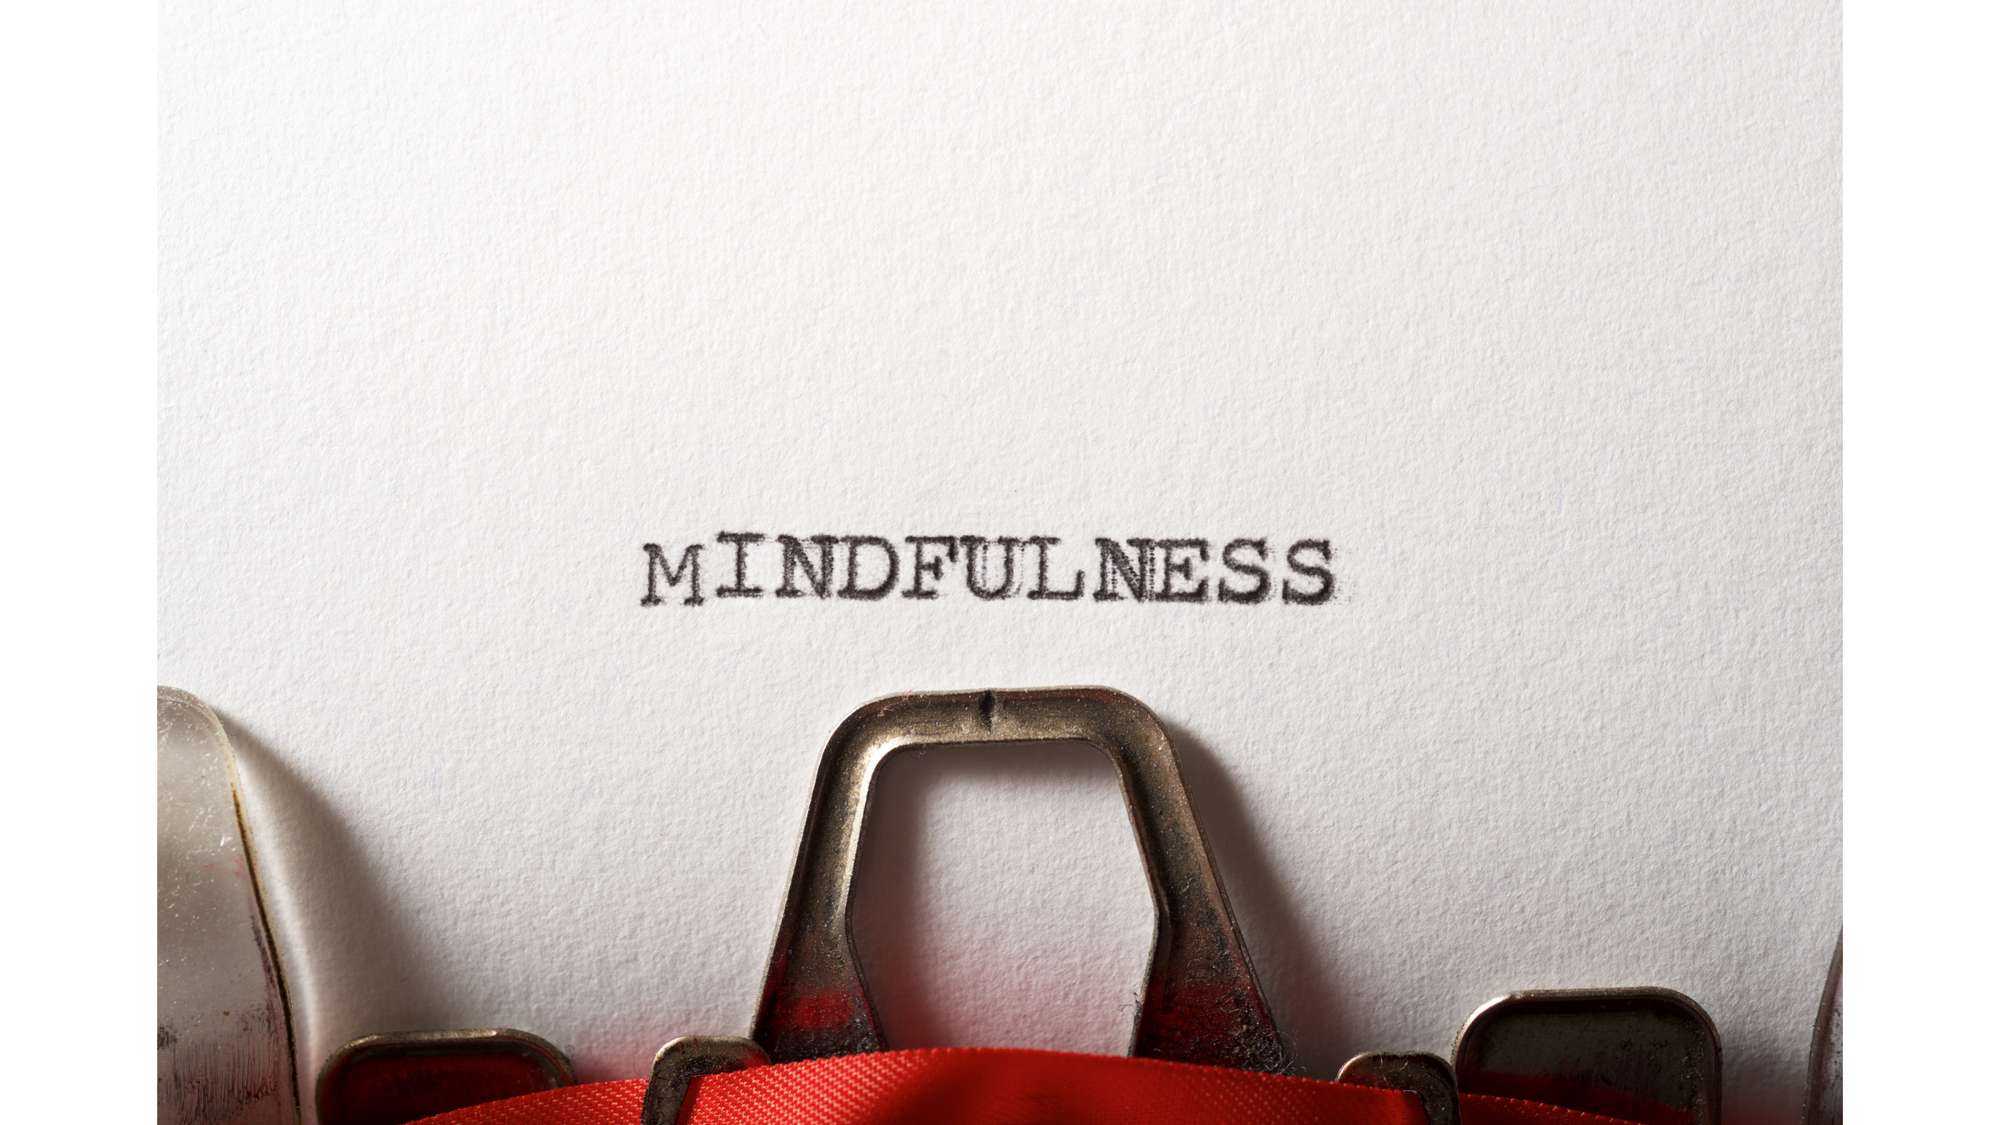 7 ways to use mindfulness when working from home